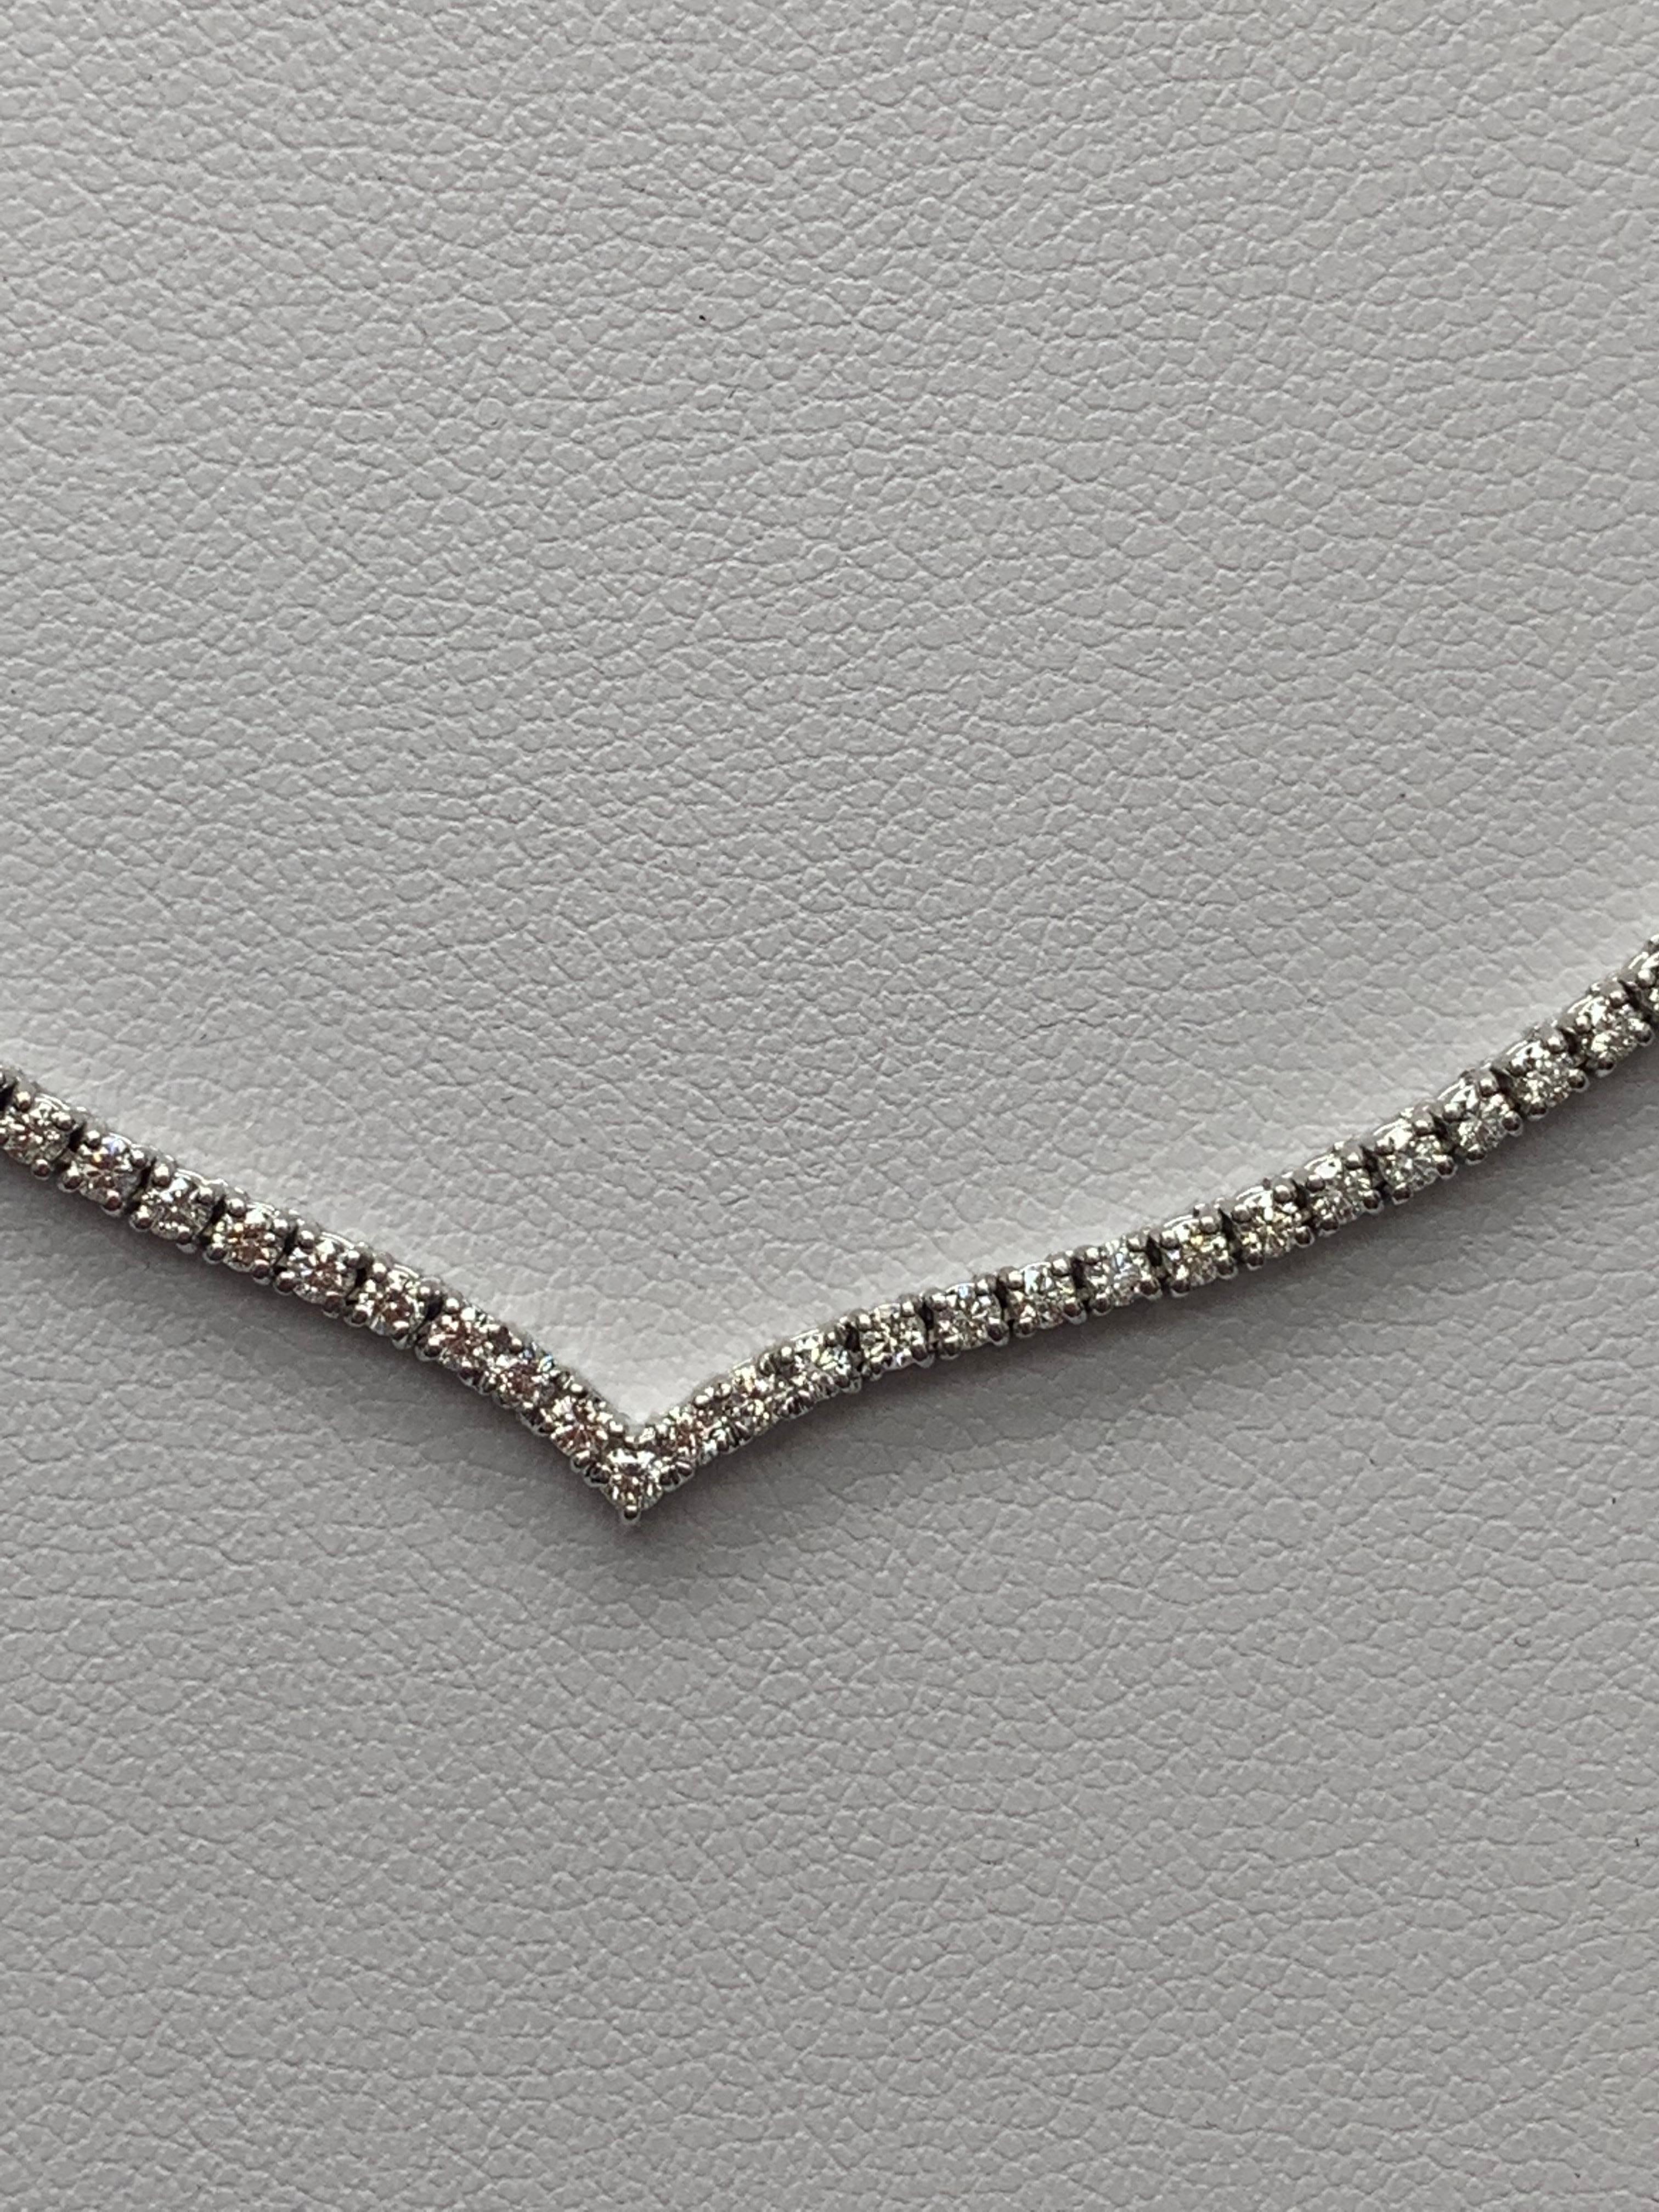 Modern 3.58 Carat Diamond Tennis Necklace in 14K White Gold For Sale